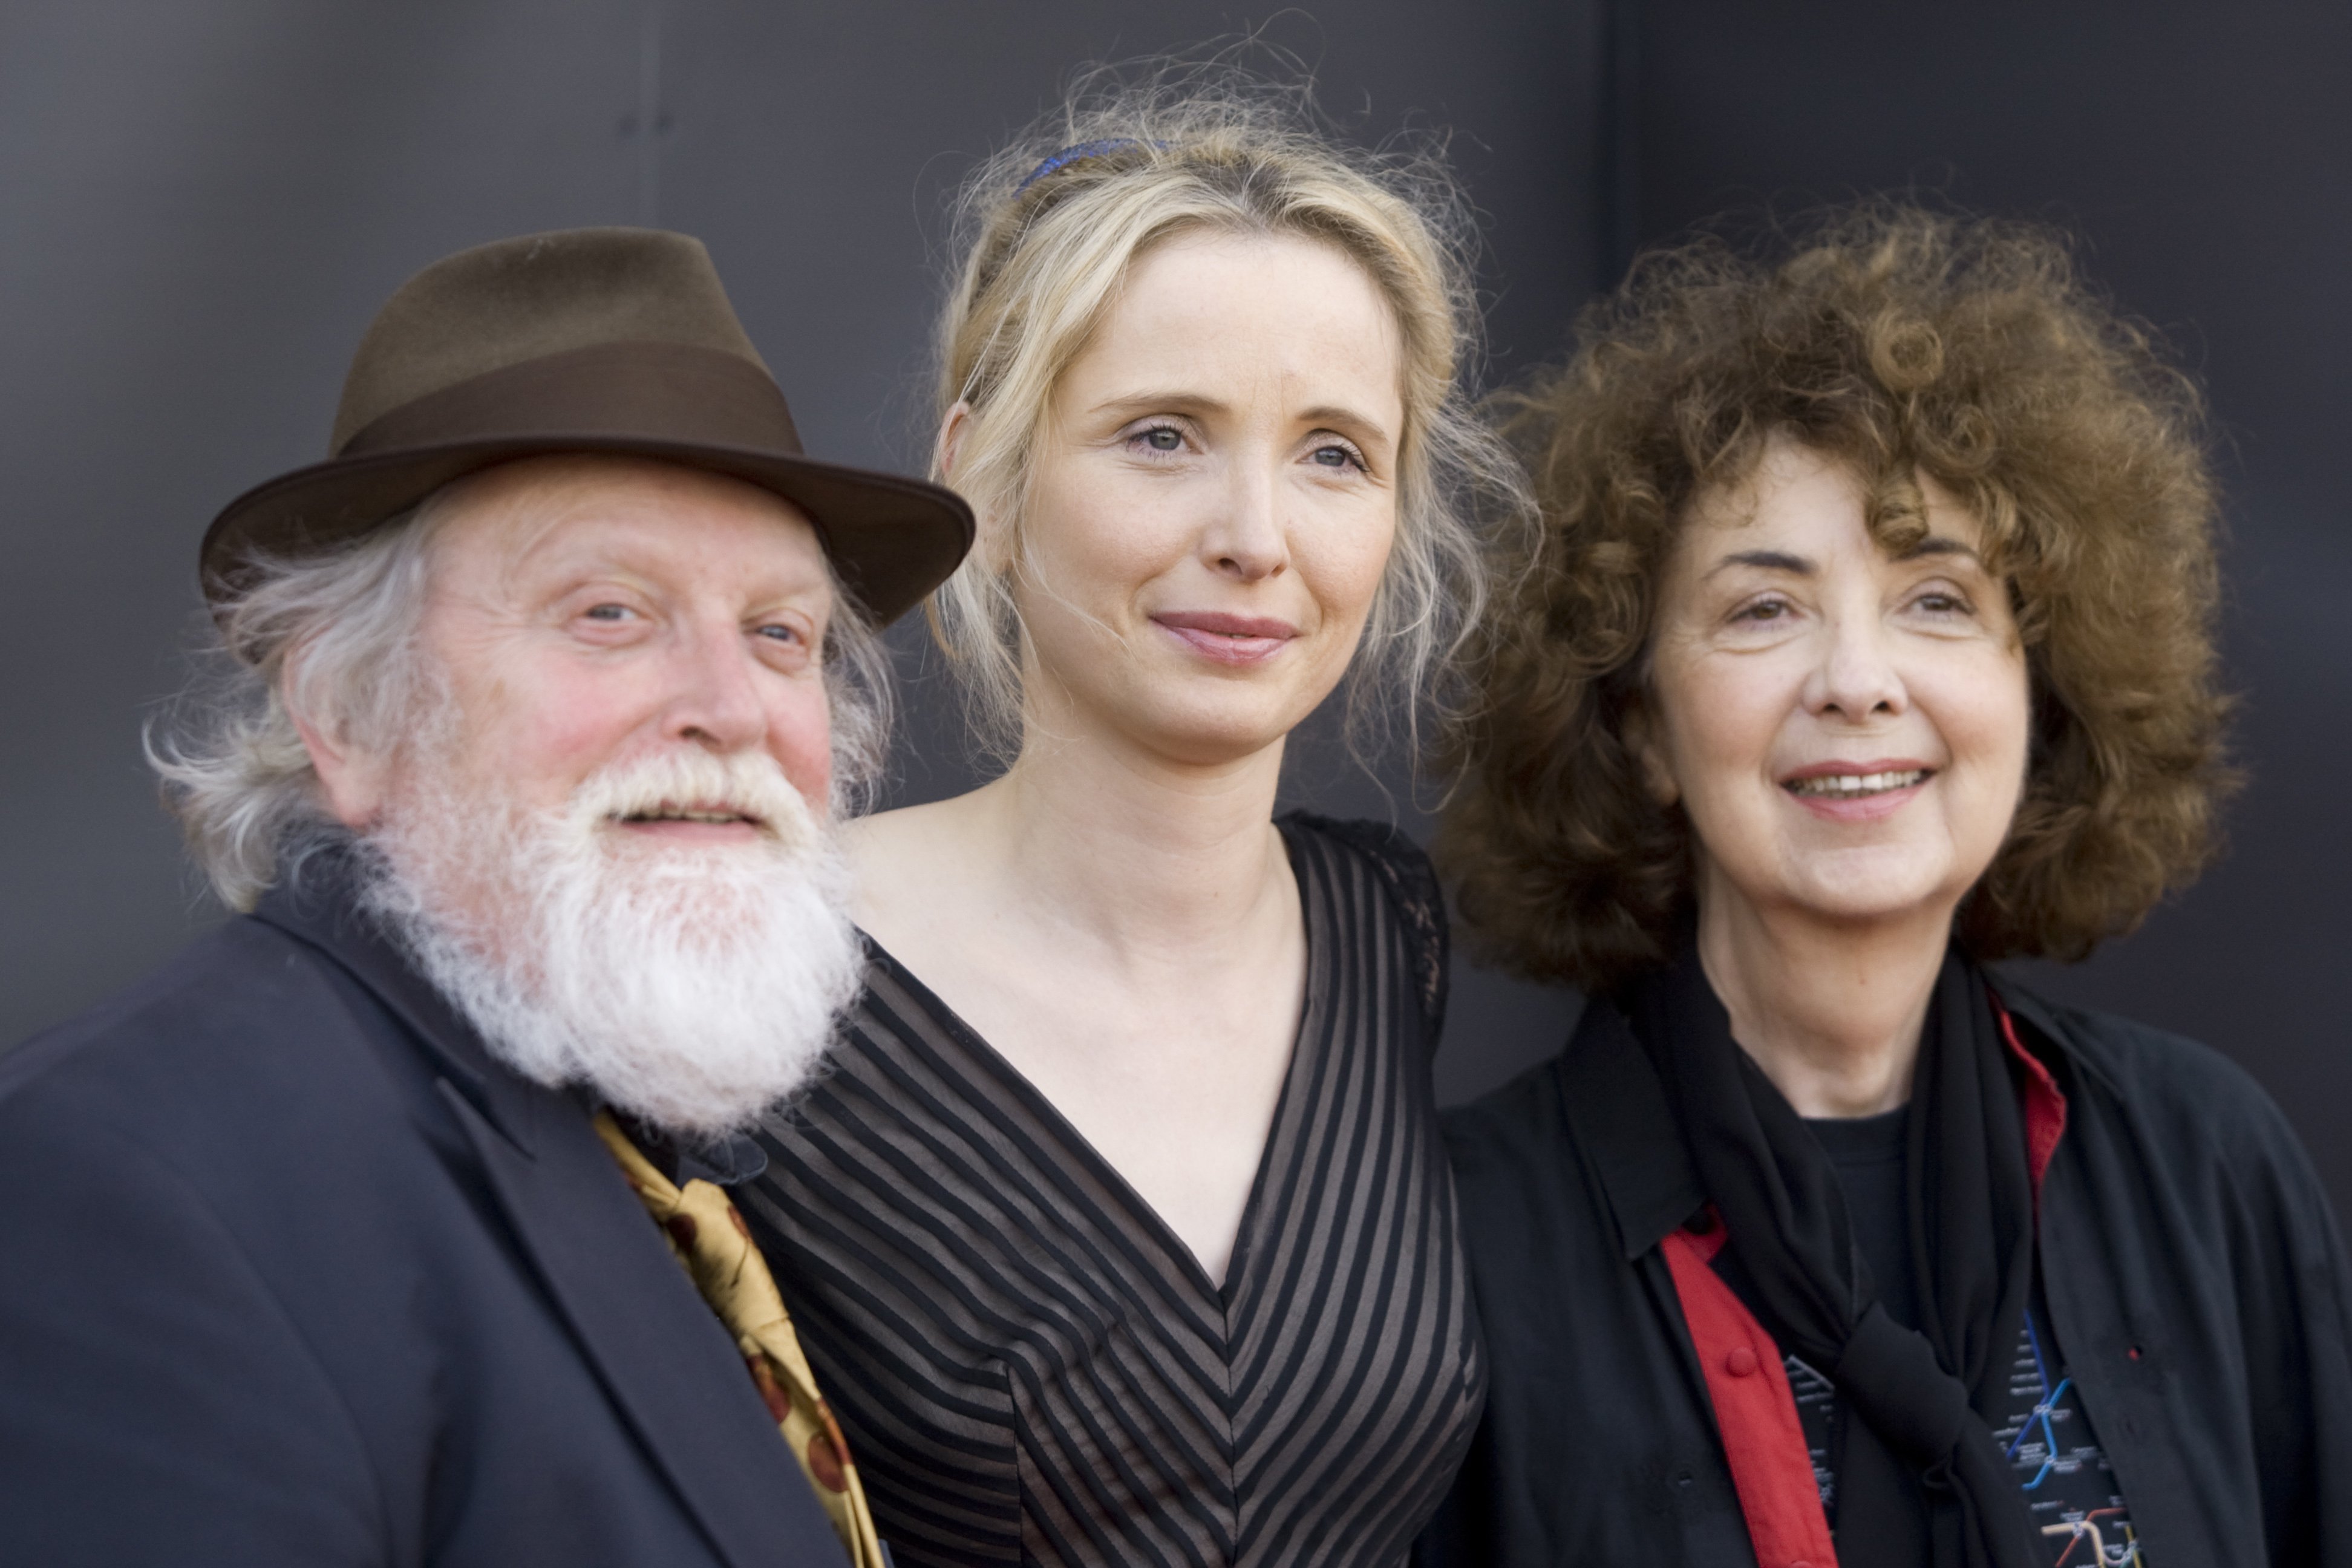 French actress Julie Delpy with her parents Albert Delpy and Marie Pillet promoting their film "Two Days In Paris," at the Edinburgh International Film Festival on August 25, 2007. | Source: Getty Images